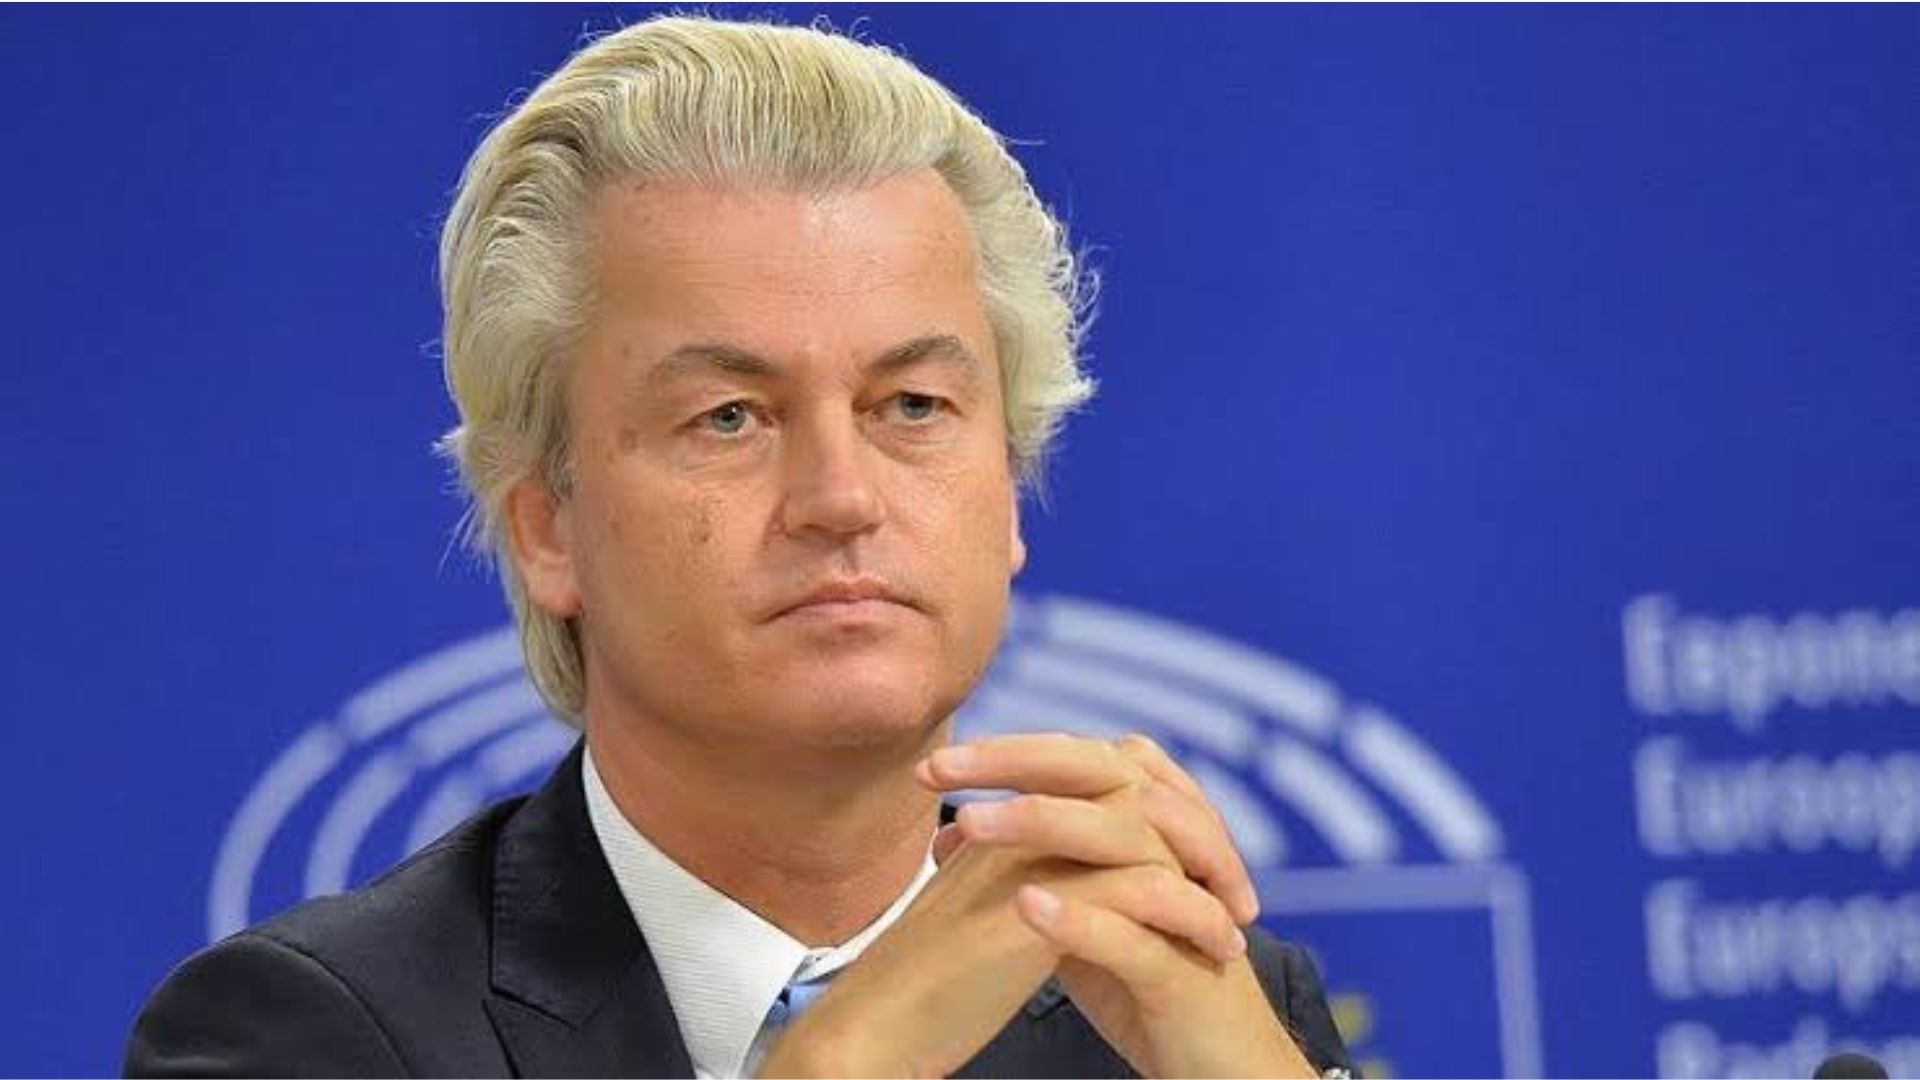 Dutch court charges two Pakistanis over calls to murder Geert Wilders